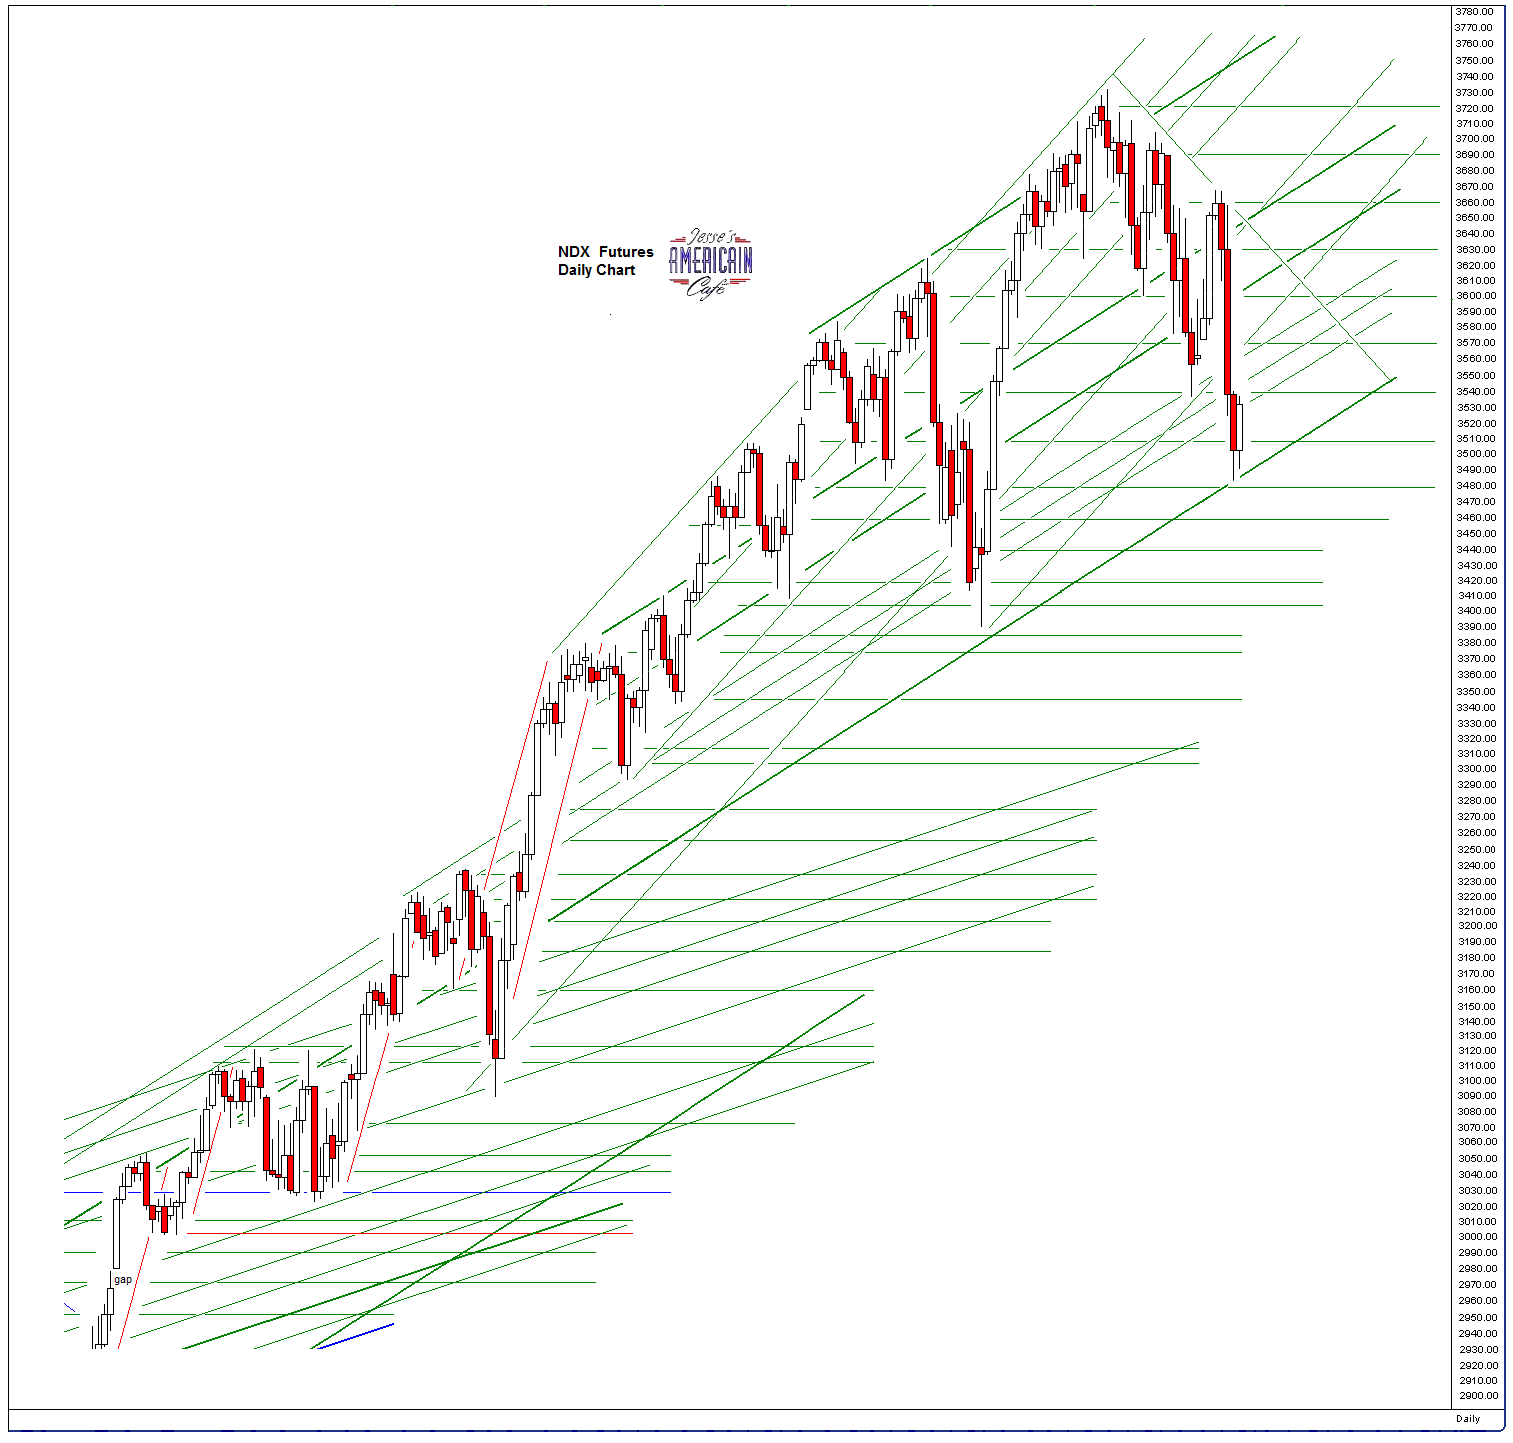 Jesse's Café Américain: SP 500 and NDX Futures Daily Charts - Bounce Off the Trendline